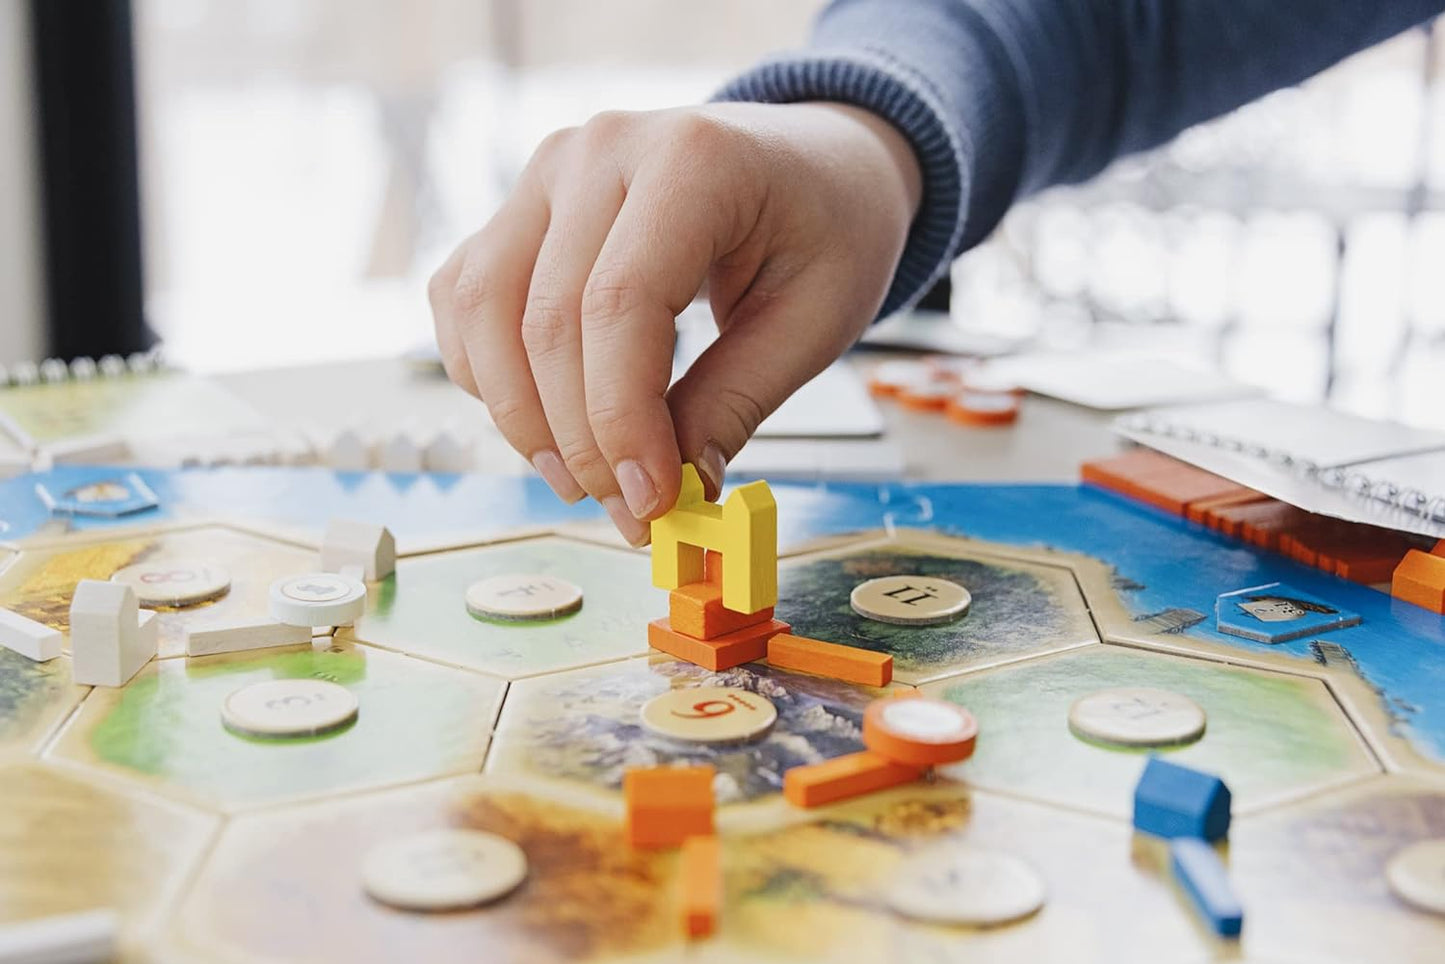 CATAN Cities & Knights Board Game Expansion